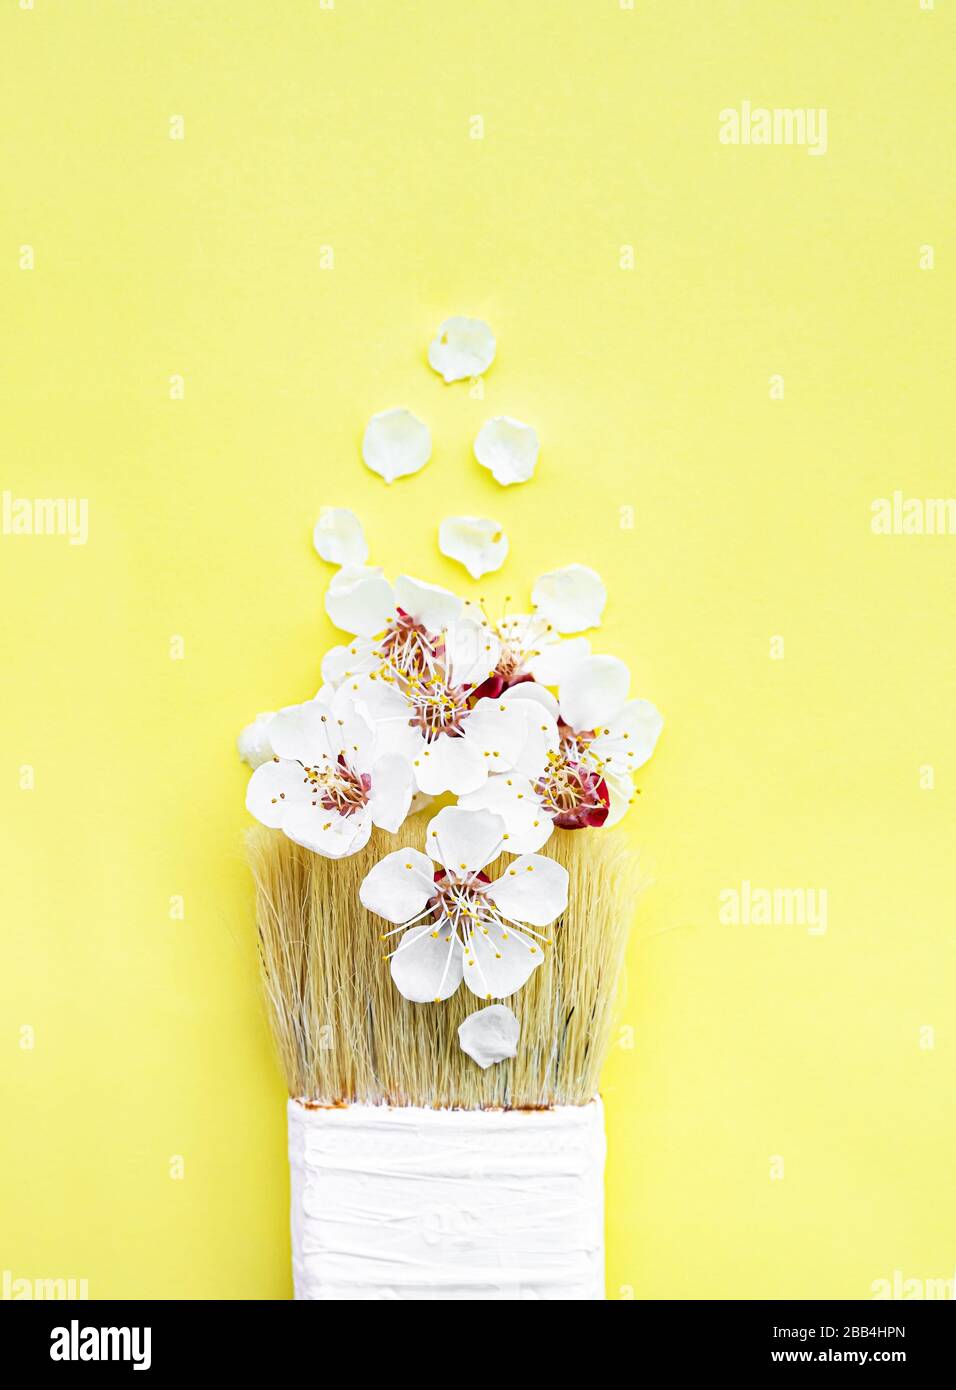 Spring blossom concept. Paint brush with apricot blossom flower on yellow background Stock Photo